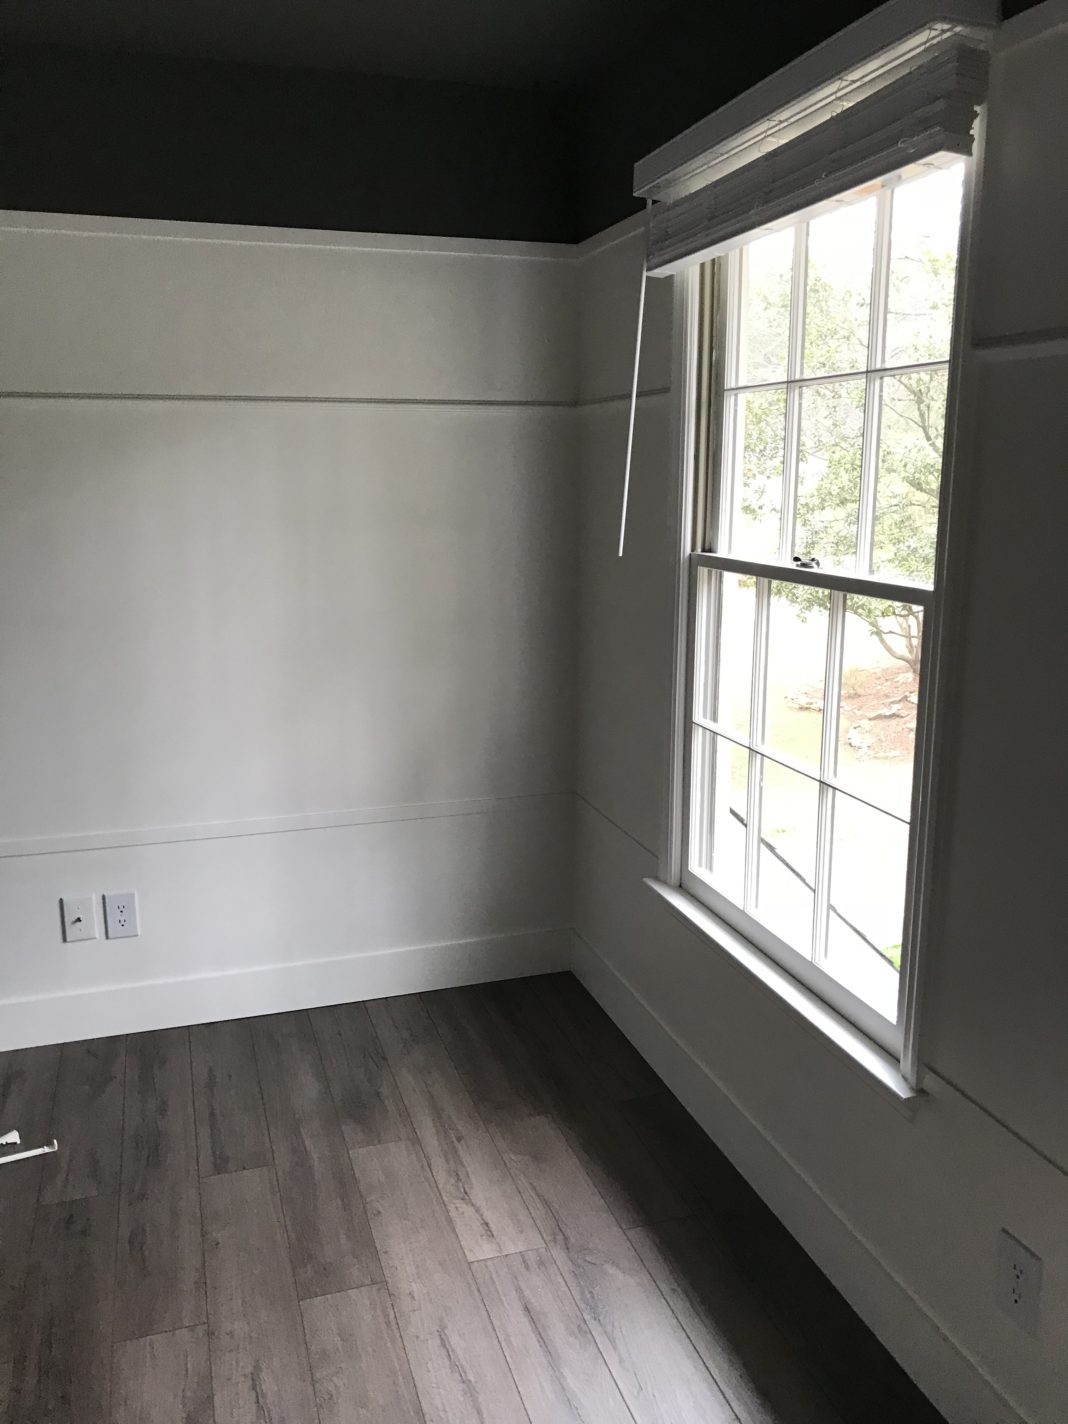 DIY small bedroom makeover with before/after photos showing how to remove wallpaper and popcorn ceilings and add new laminate flooring on a budget.